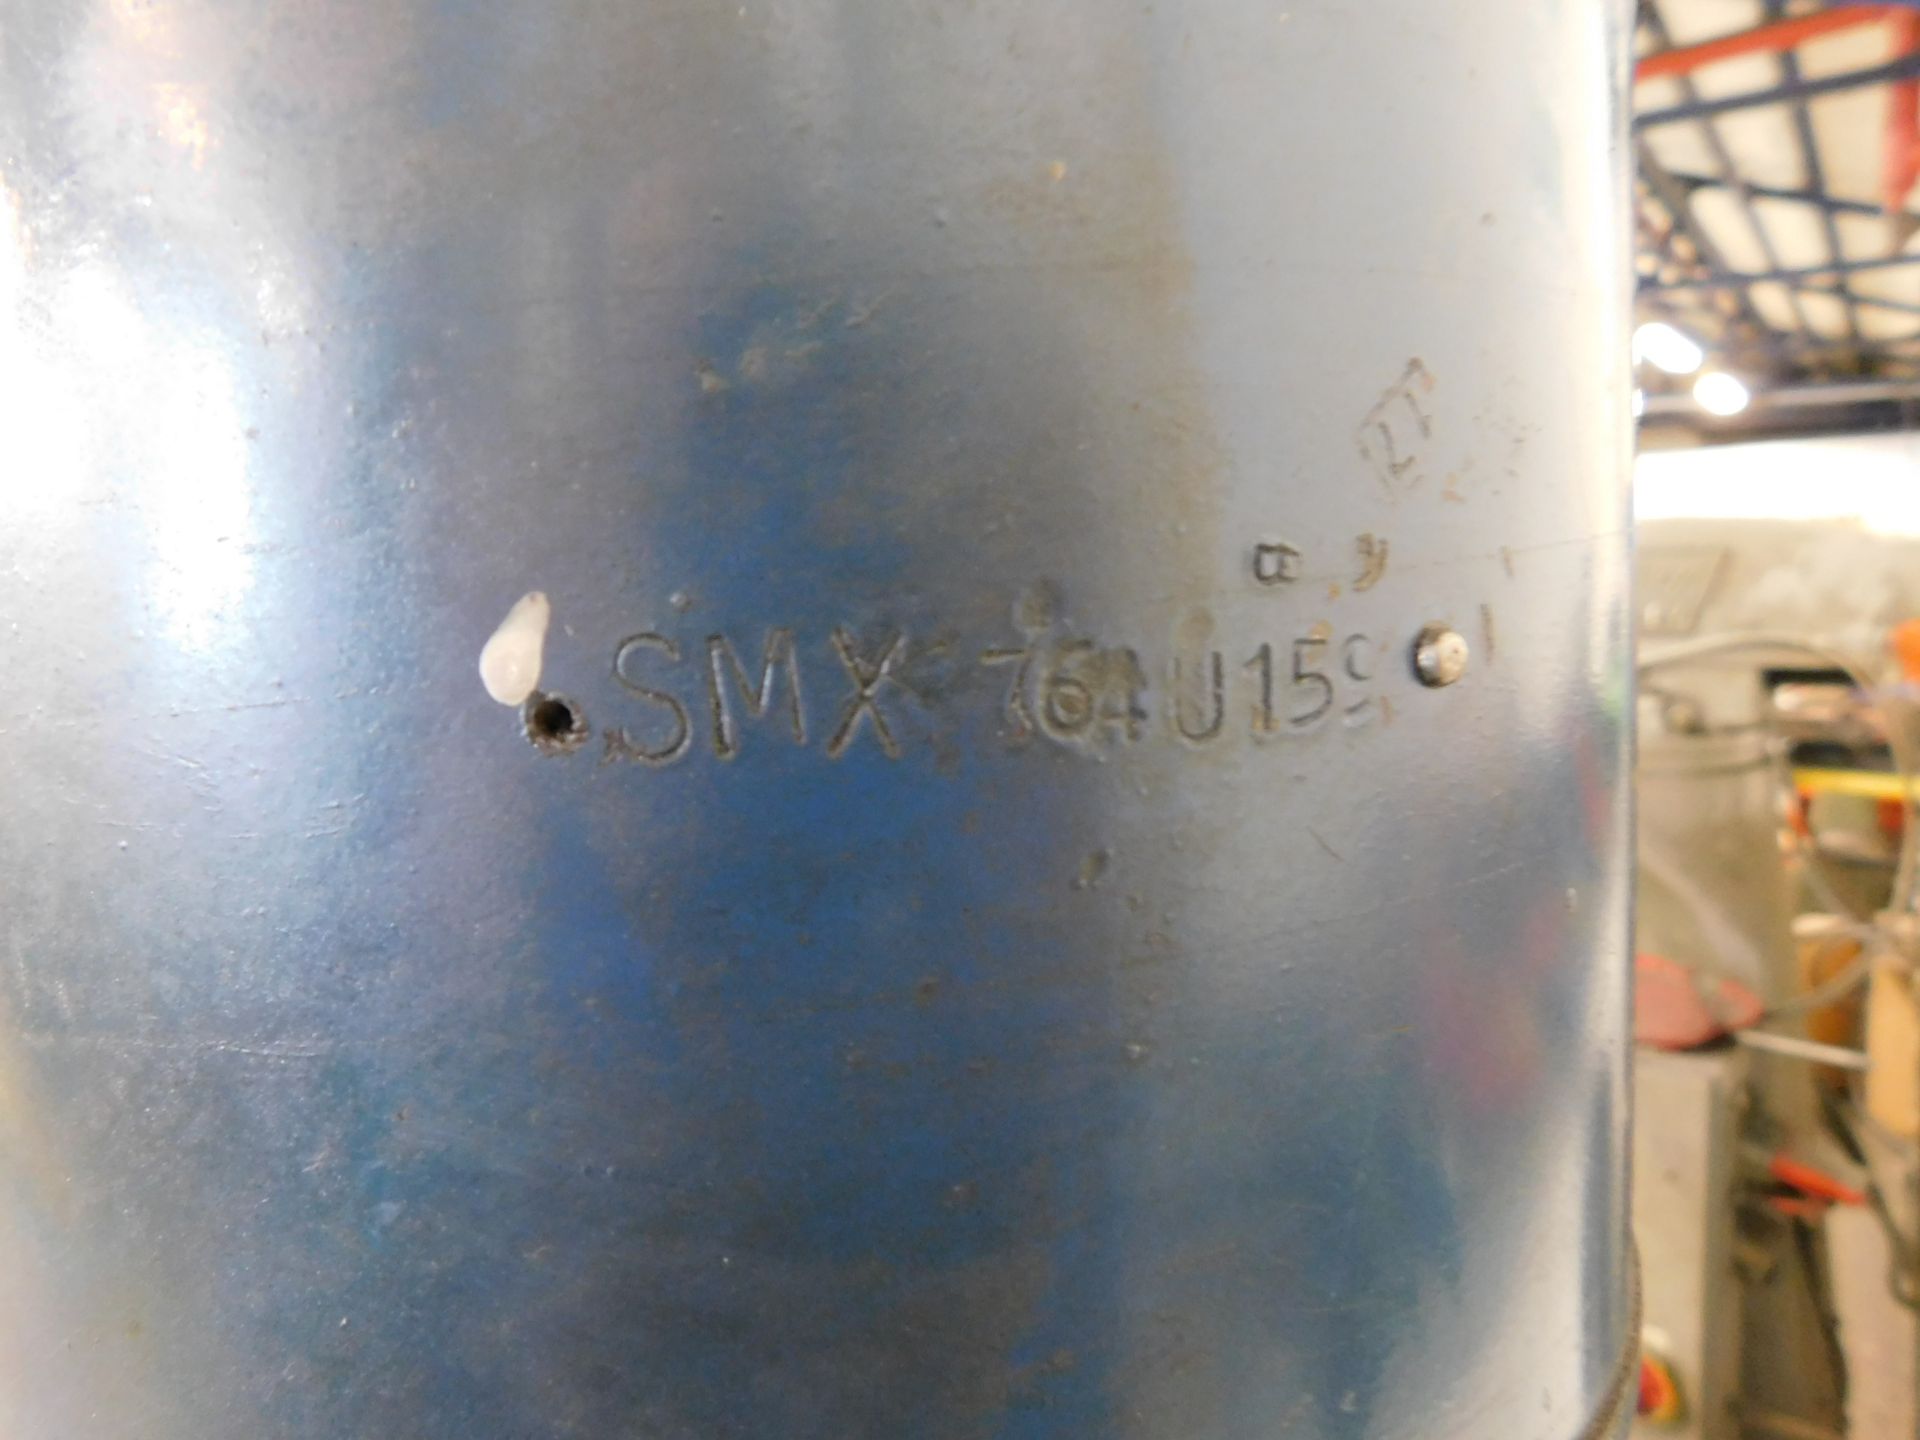 Fobco 7-Speed Pedestal Drill, Serial Number SMX781J159, 3-Phase (Location: Kettering - See General - Image 3 of 3